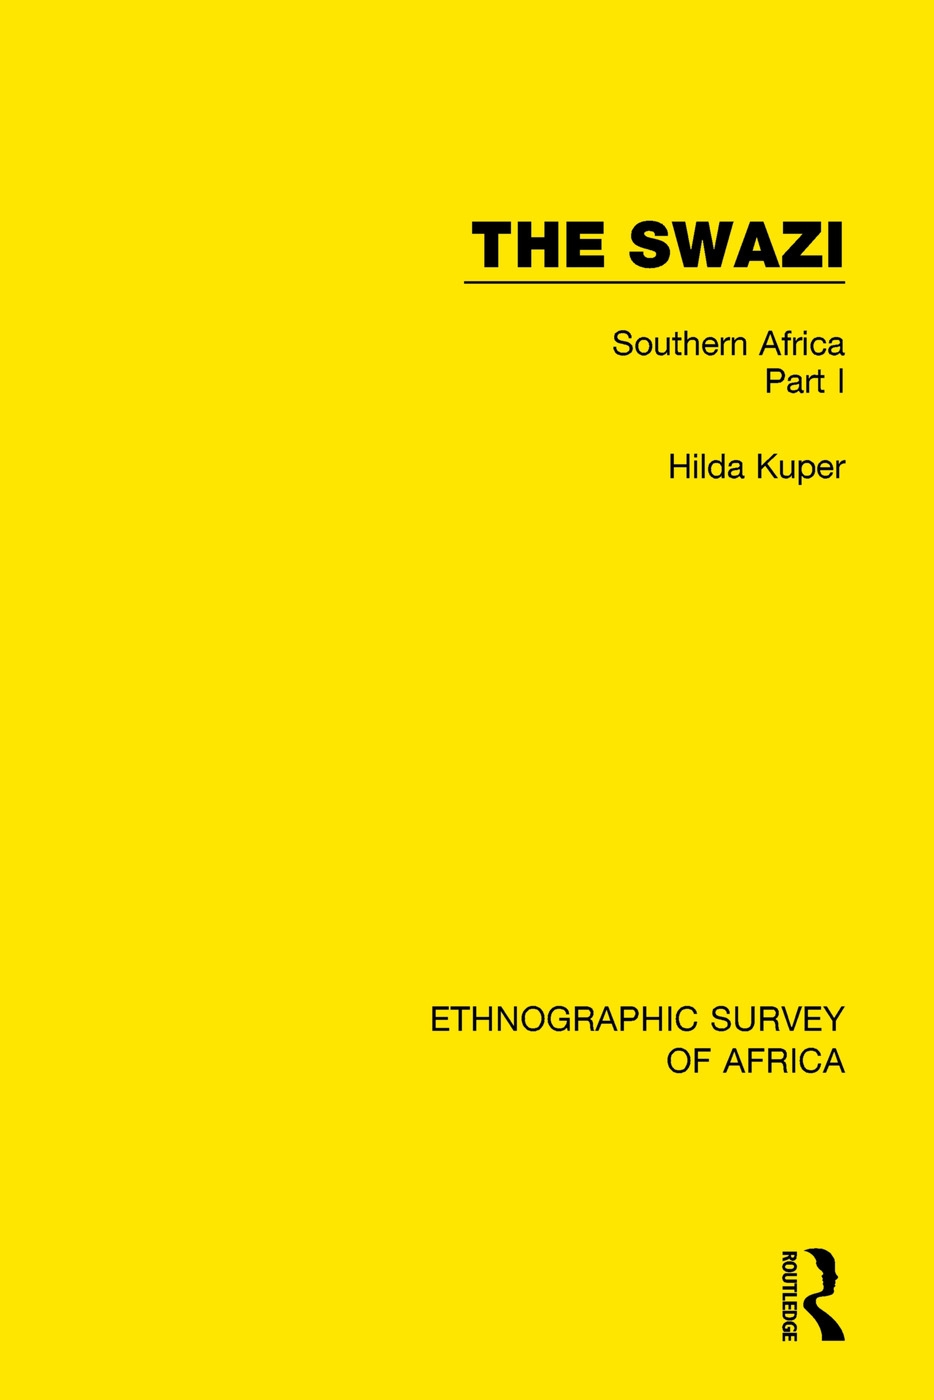 The Swazi: Southern Africa Part I